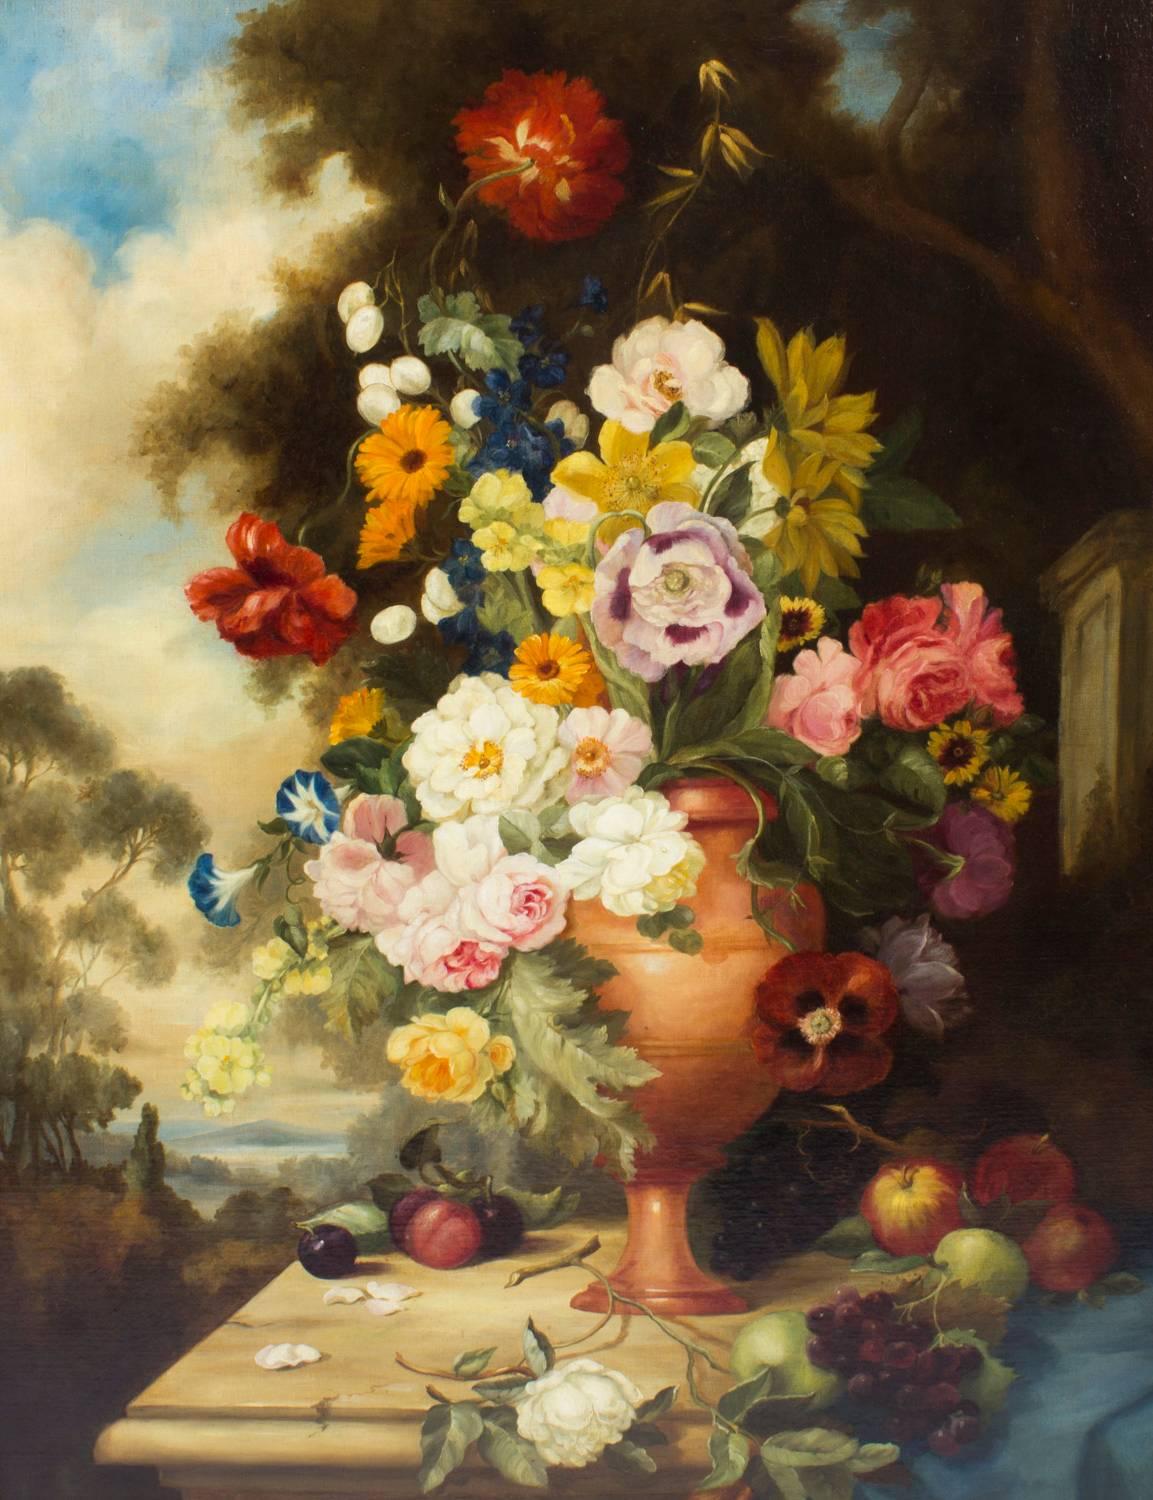 This beautiful large antique floral continental school still life, is oil on canvas laid down on board and is mid-19th century in date.

The painting features a sumptuous bouquet of flowers in a classical vase with fruit painted in rich vibrant